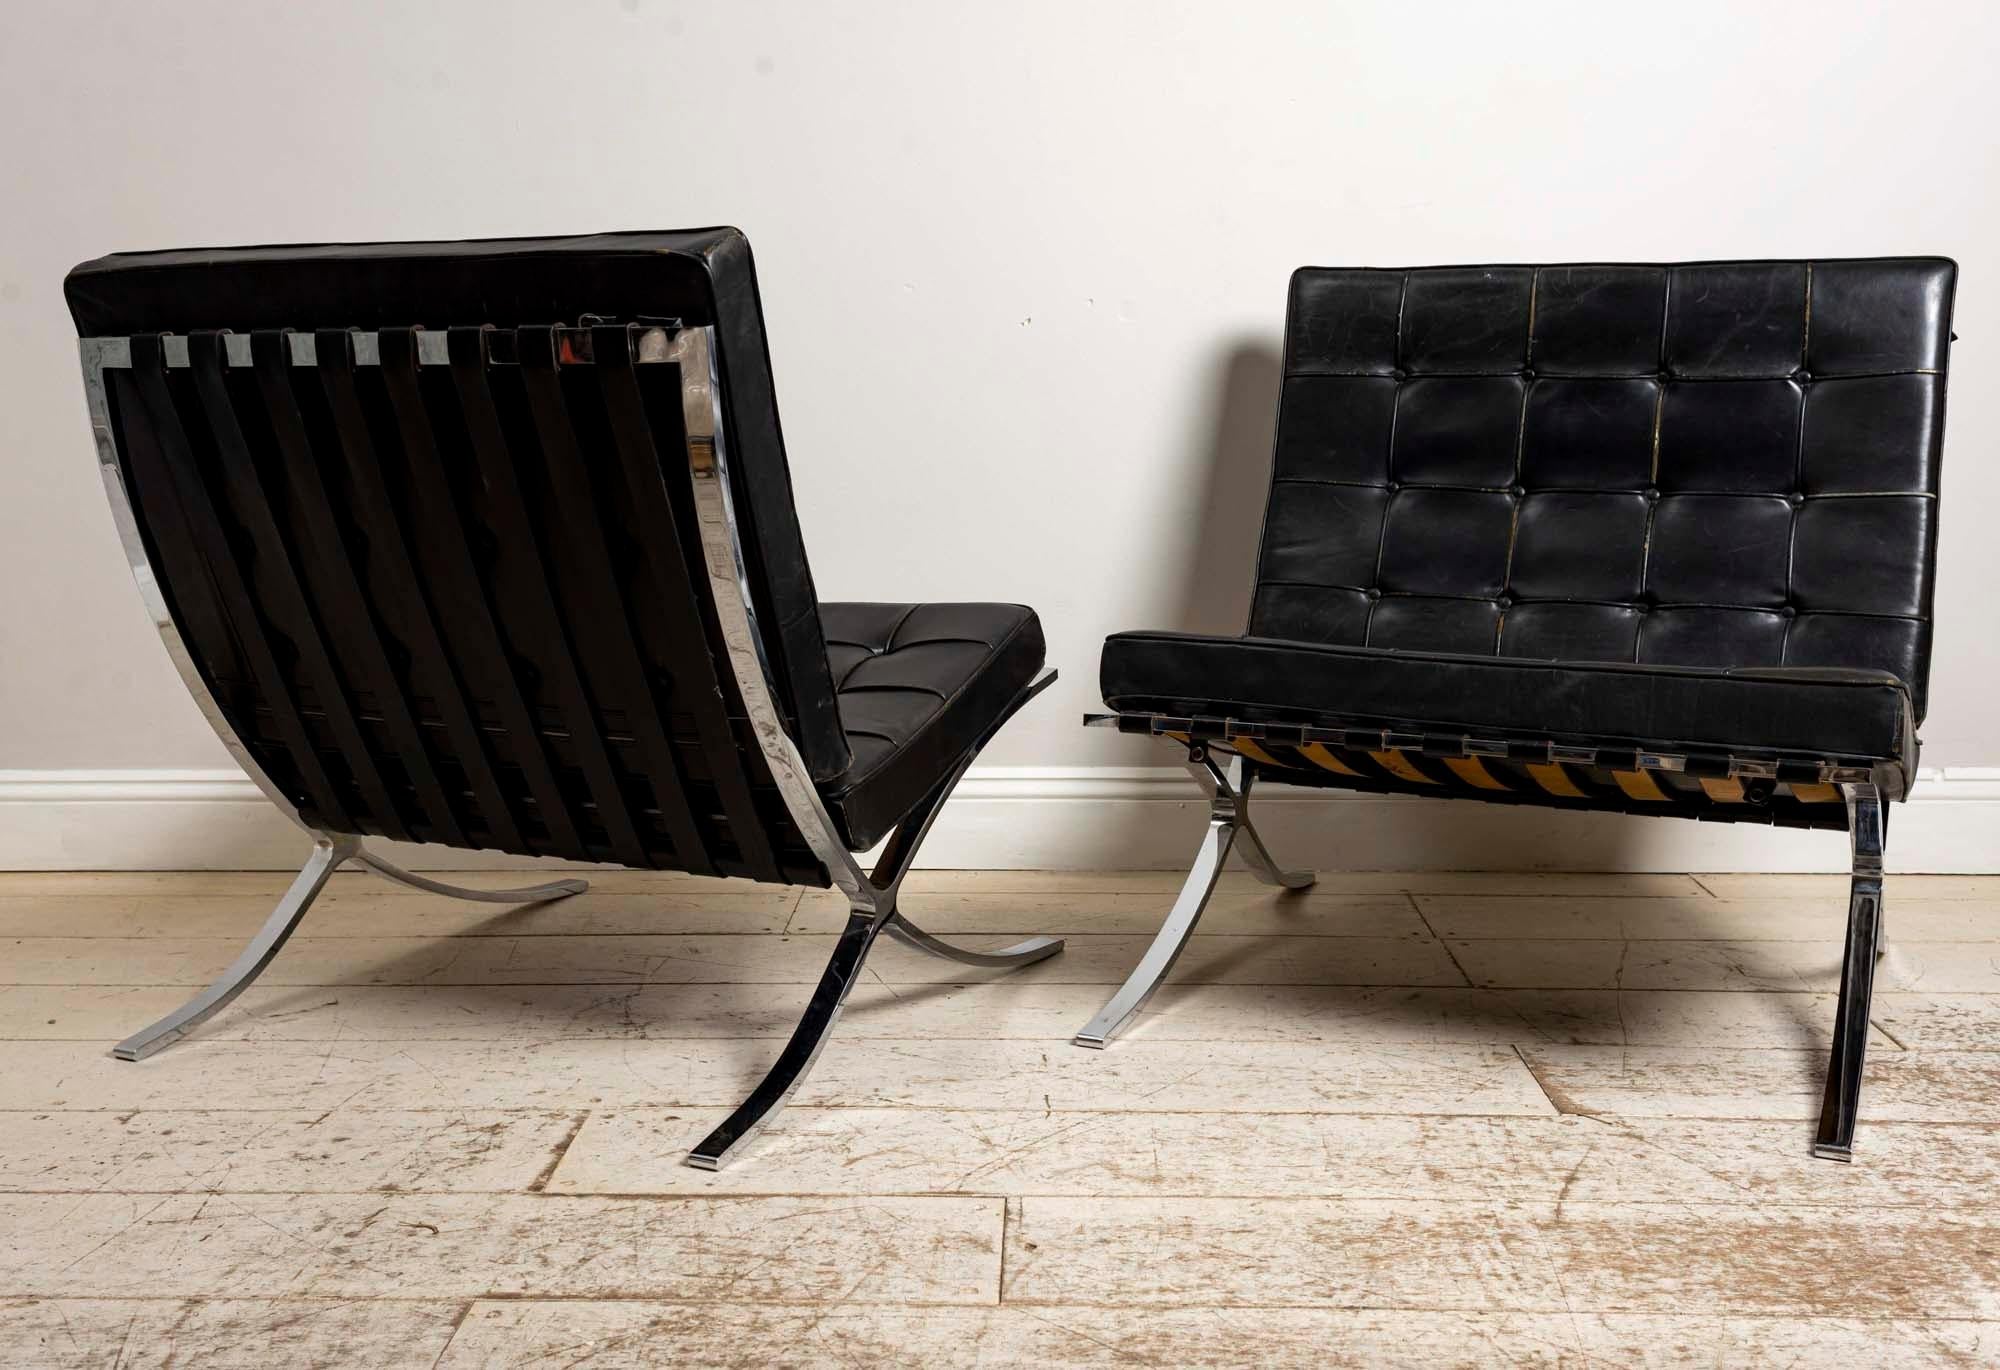 Metalwork Pair of 1950s Mies van der Rohe Chrome and Black Leather Barcelona Chairs